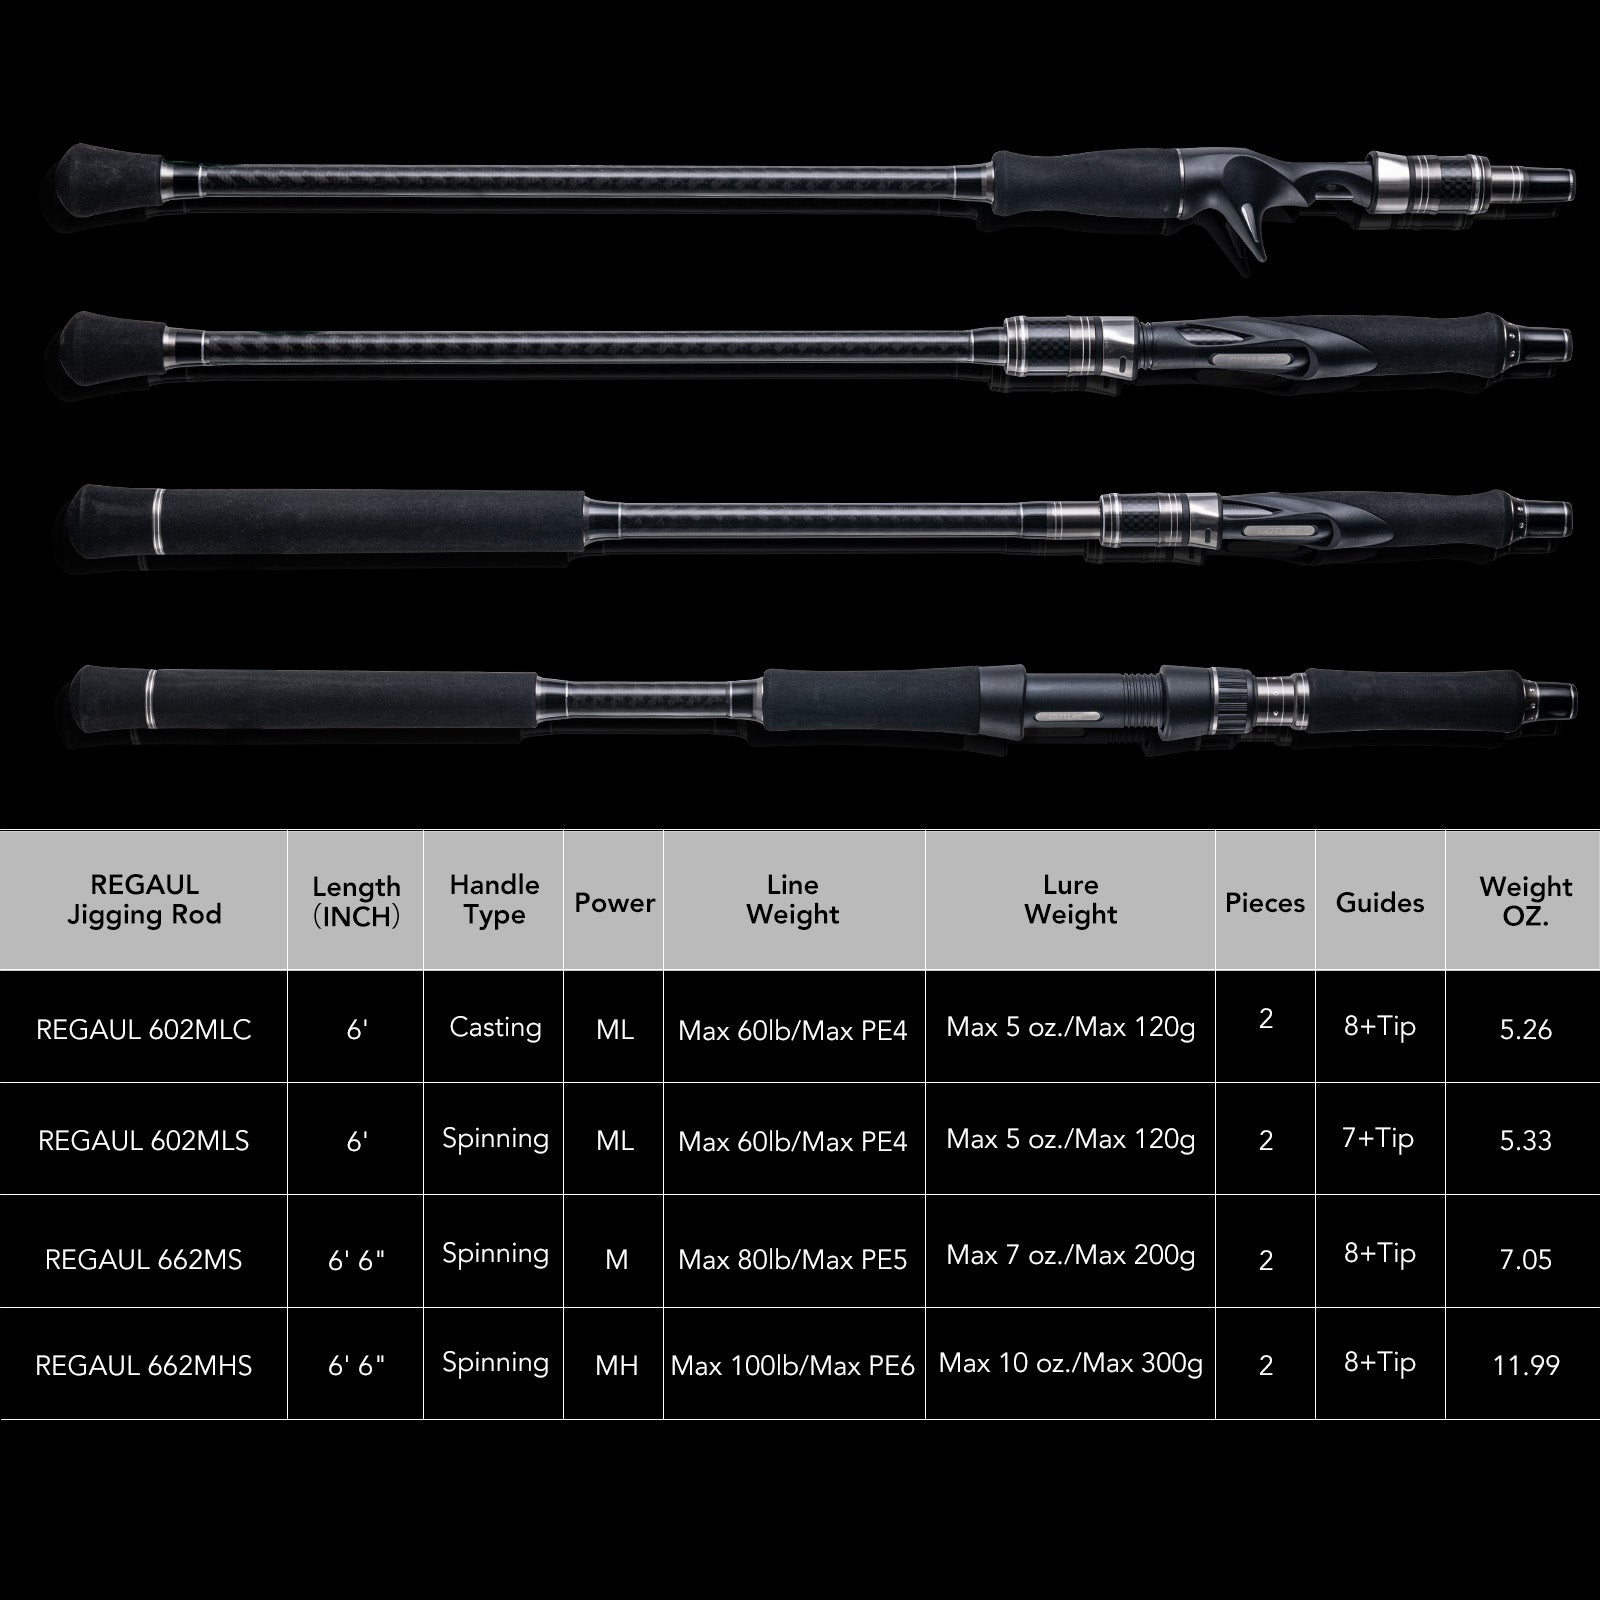 Goture 2 Piece Jigging Spinning/Casting Rod Saltwater, Slow Pitch